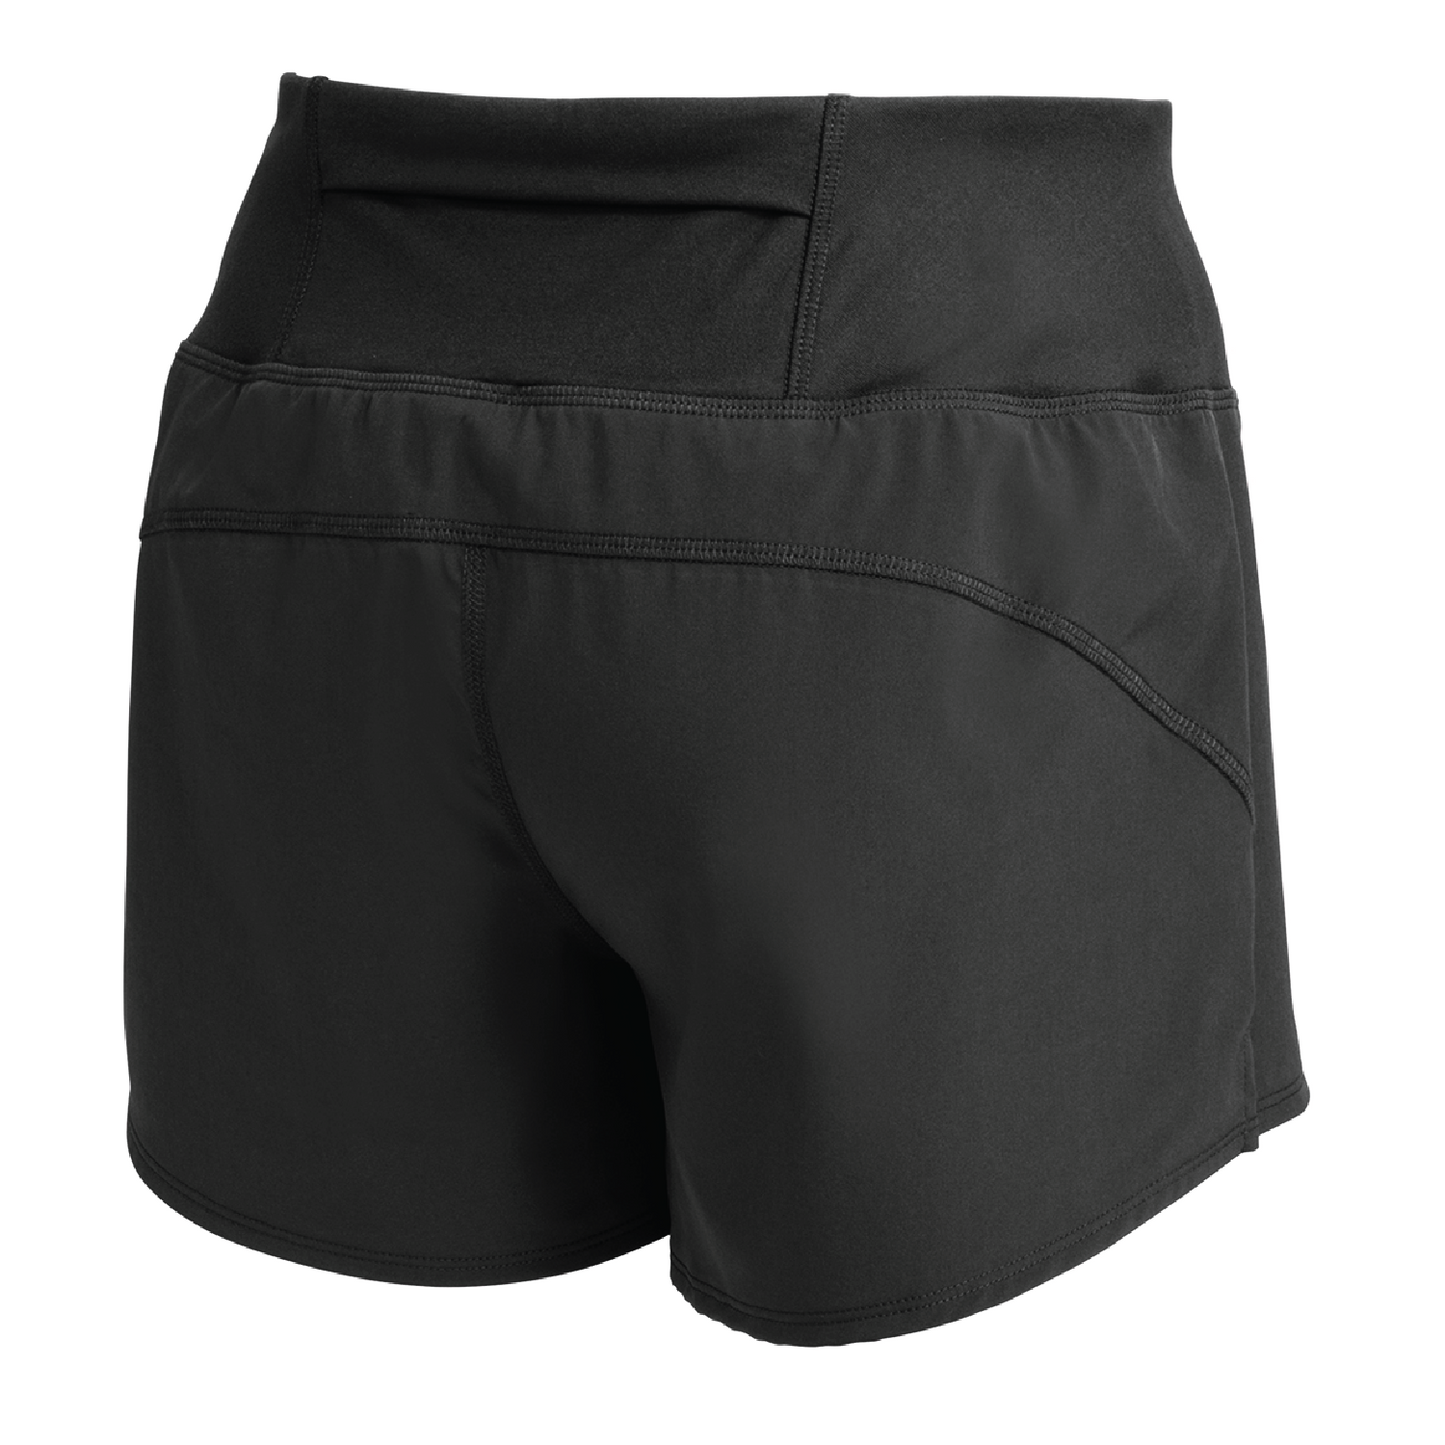 Rams Fastpitch Womens's Running Shorts